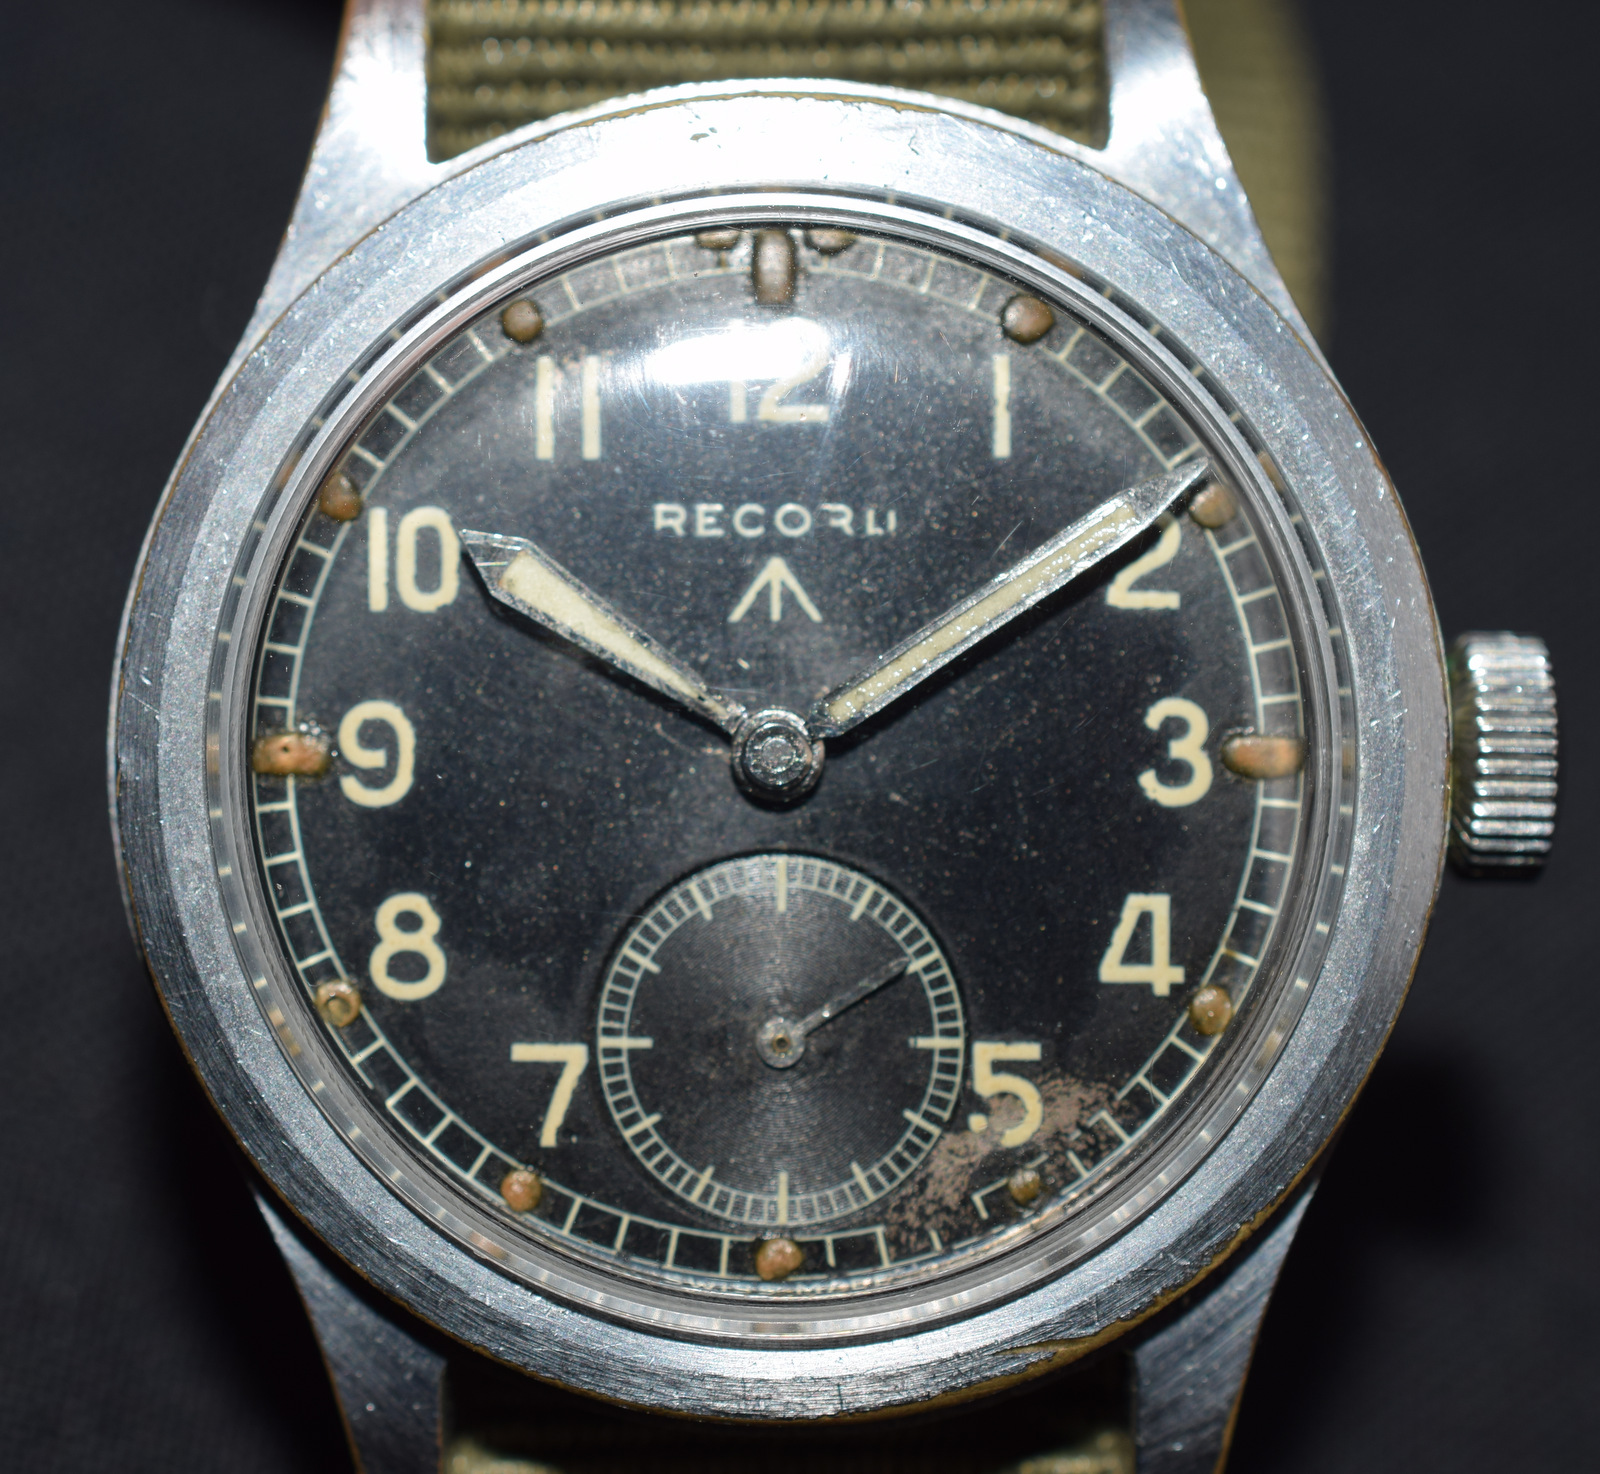 Very Collectable Dirty Dozen Record WW2 Wristwatch - Image 7 of 8